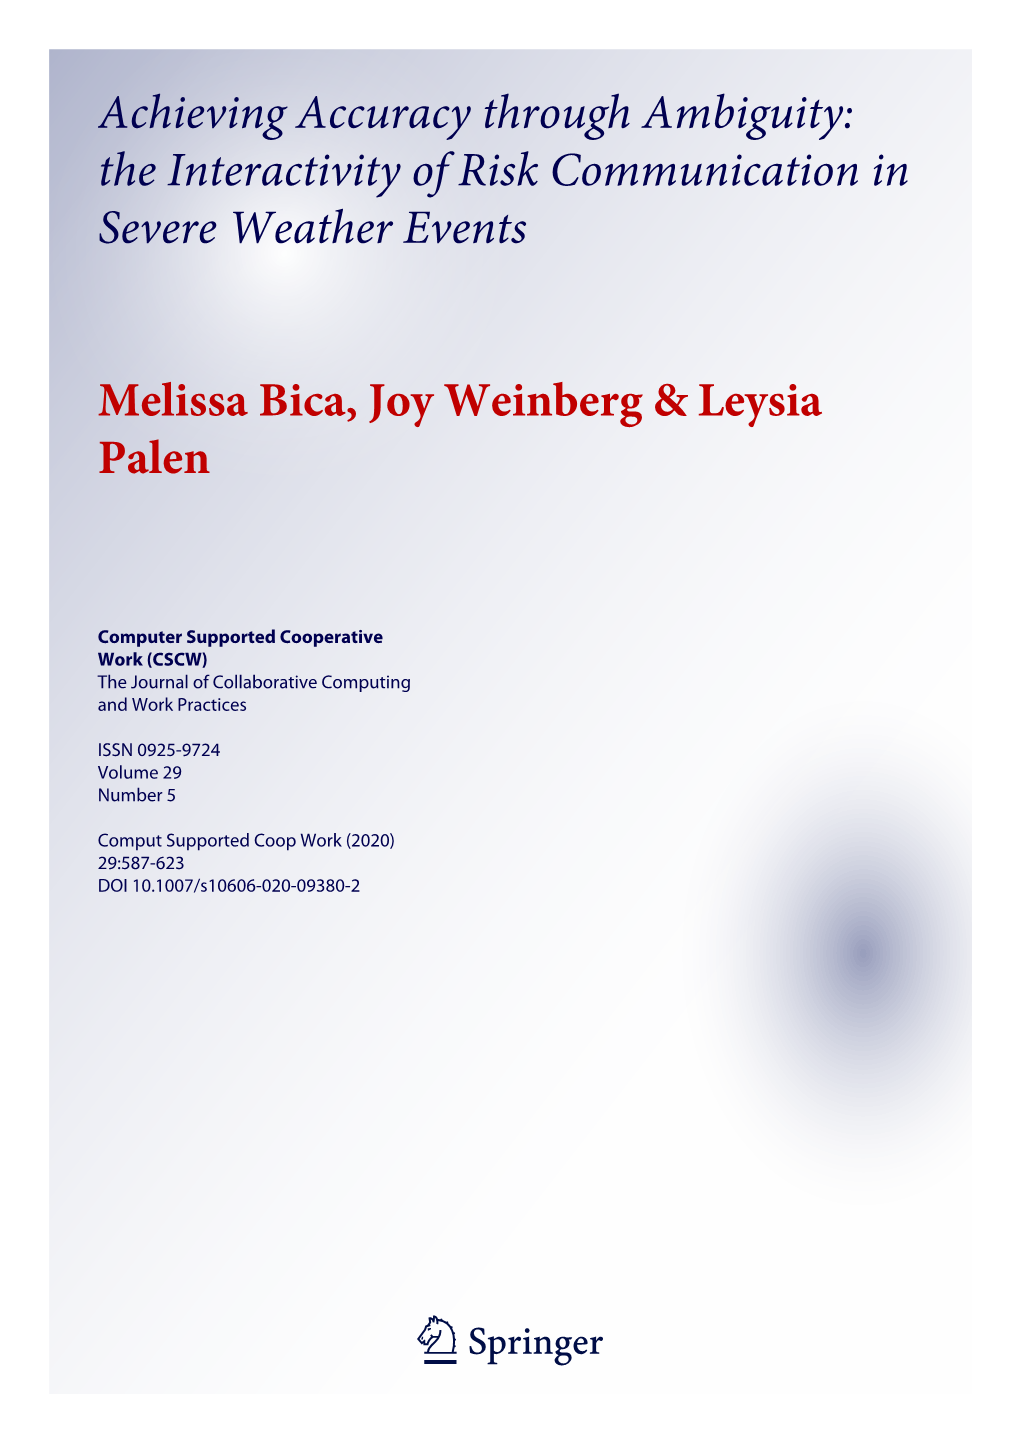 The Interactivity of Risk Communication in Severe Weather Events